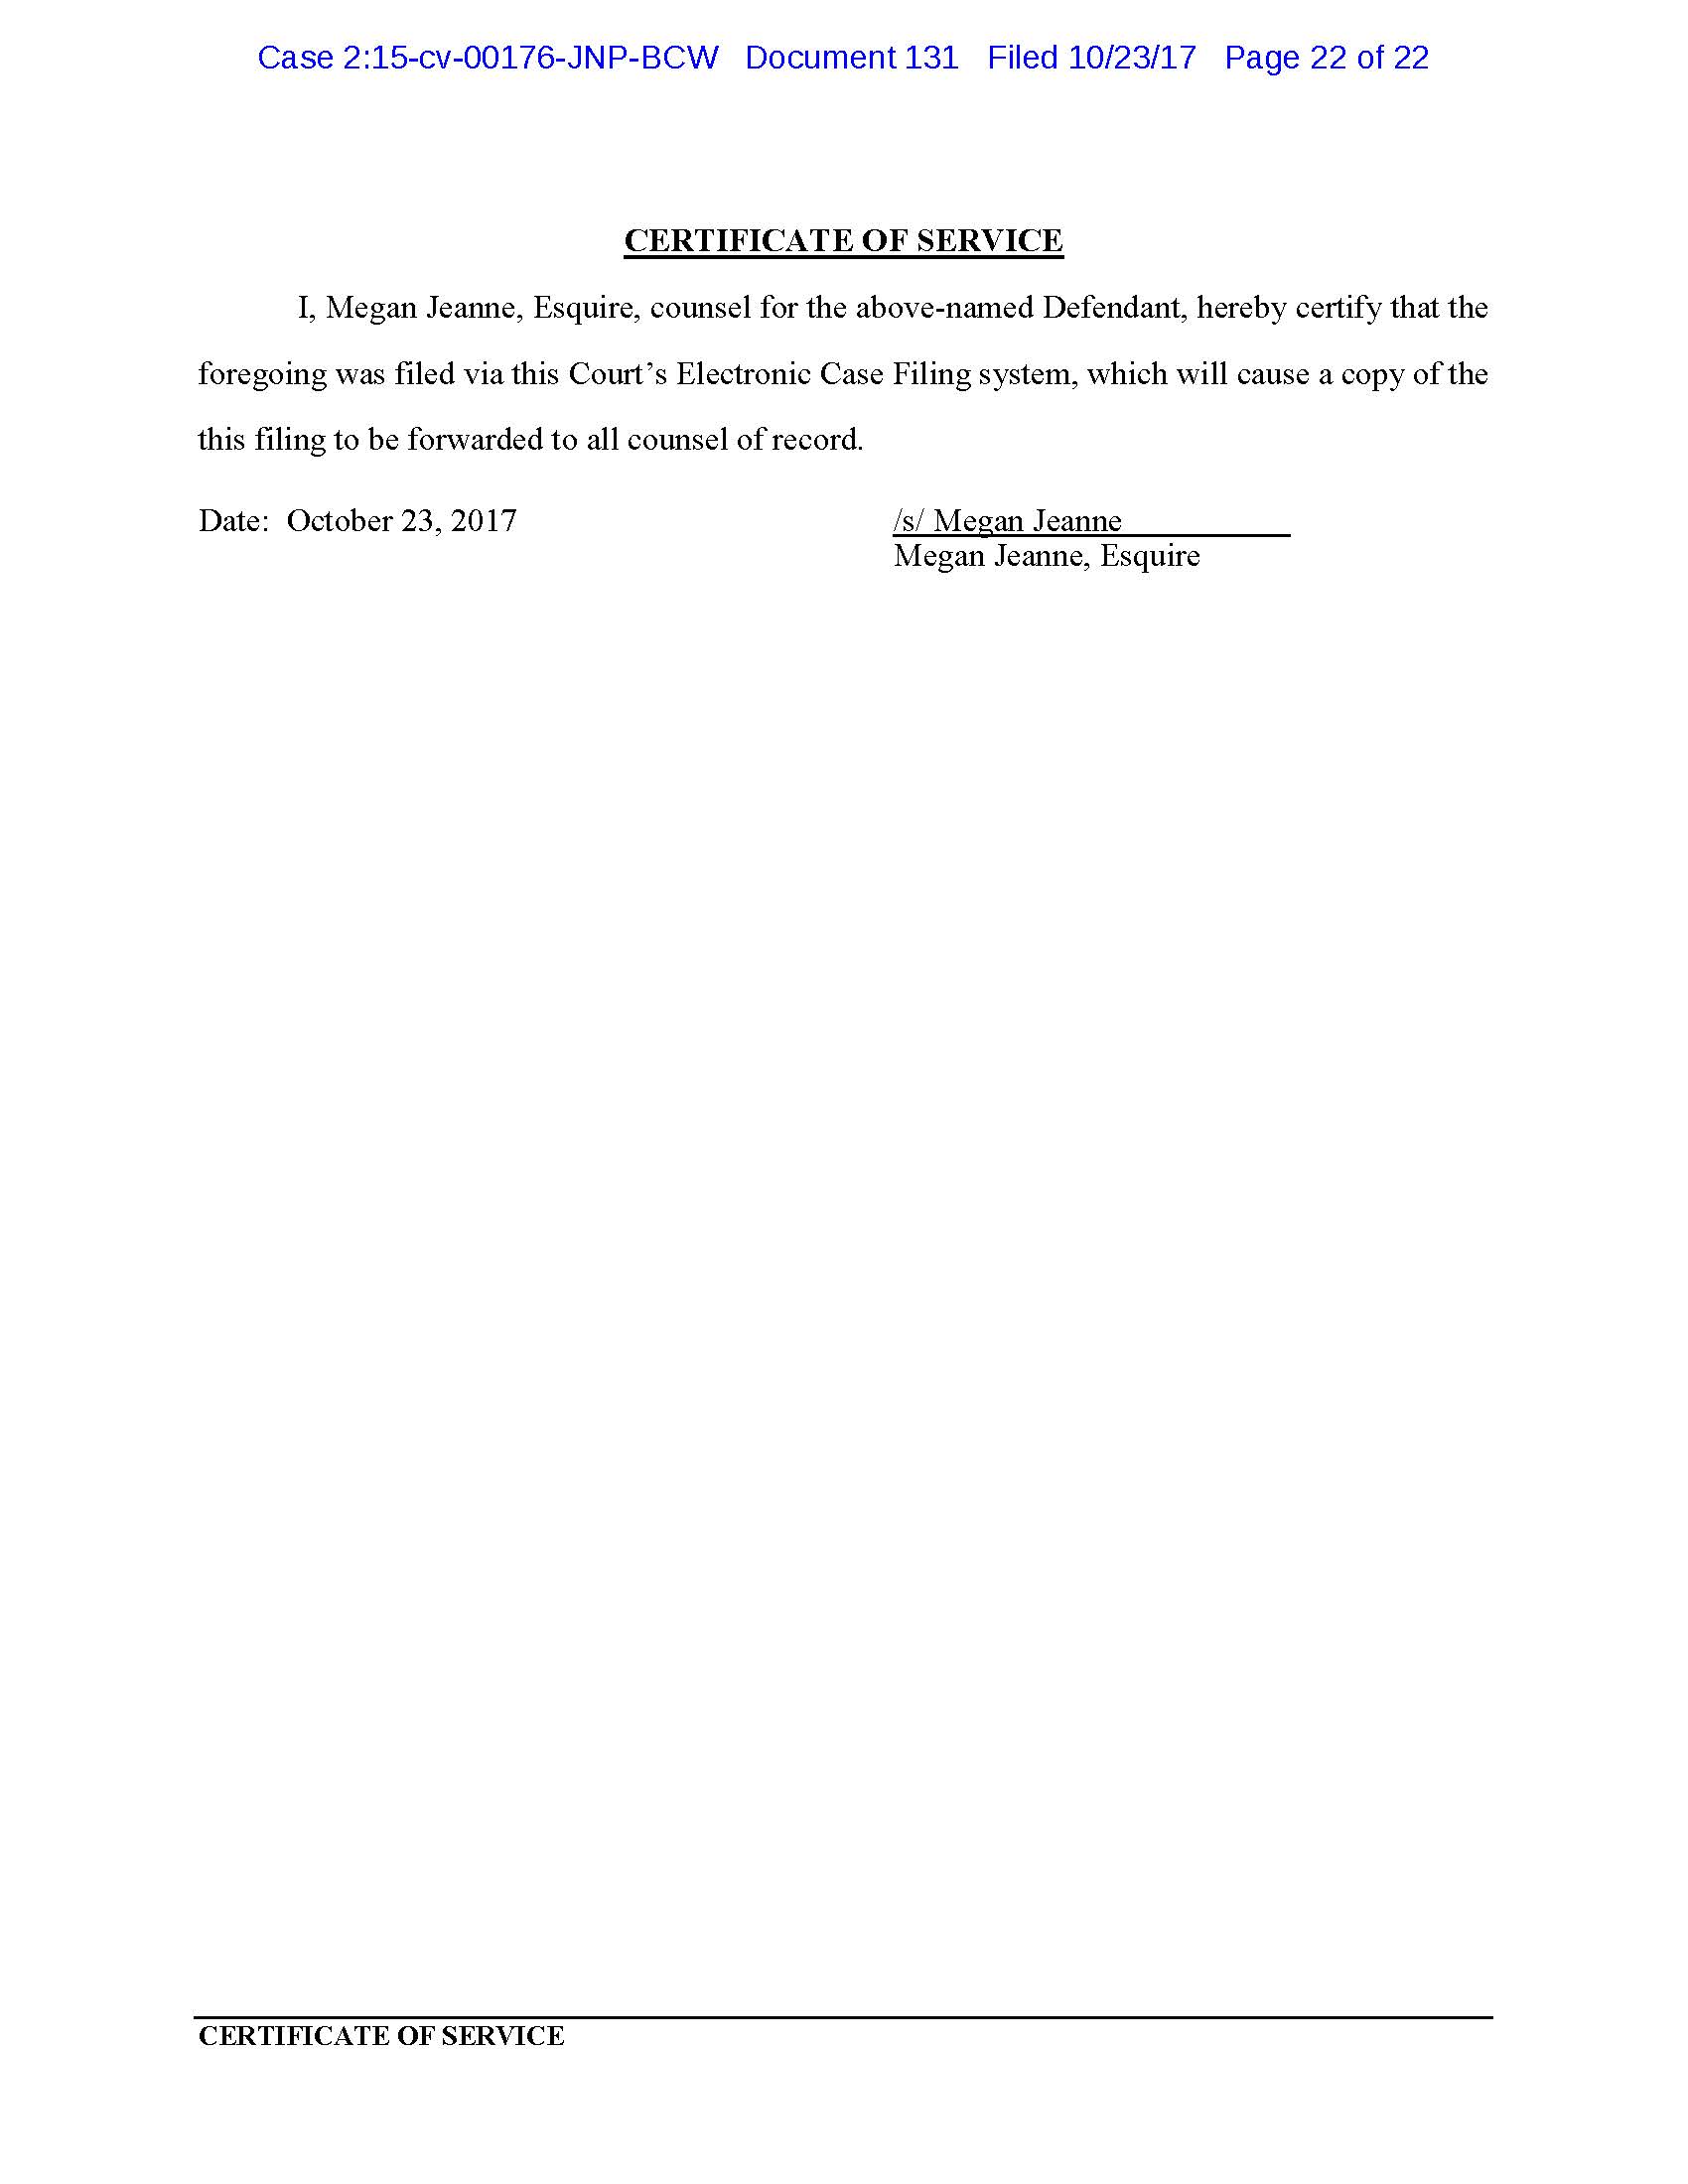 99.1 Motion for Reconsideration_Page_22.jpg